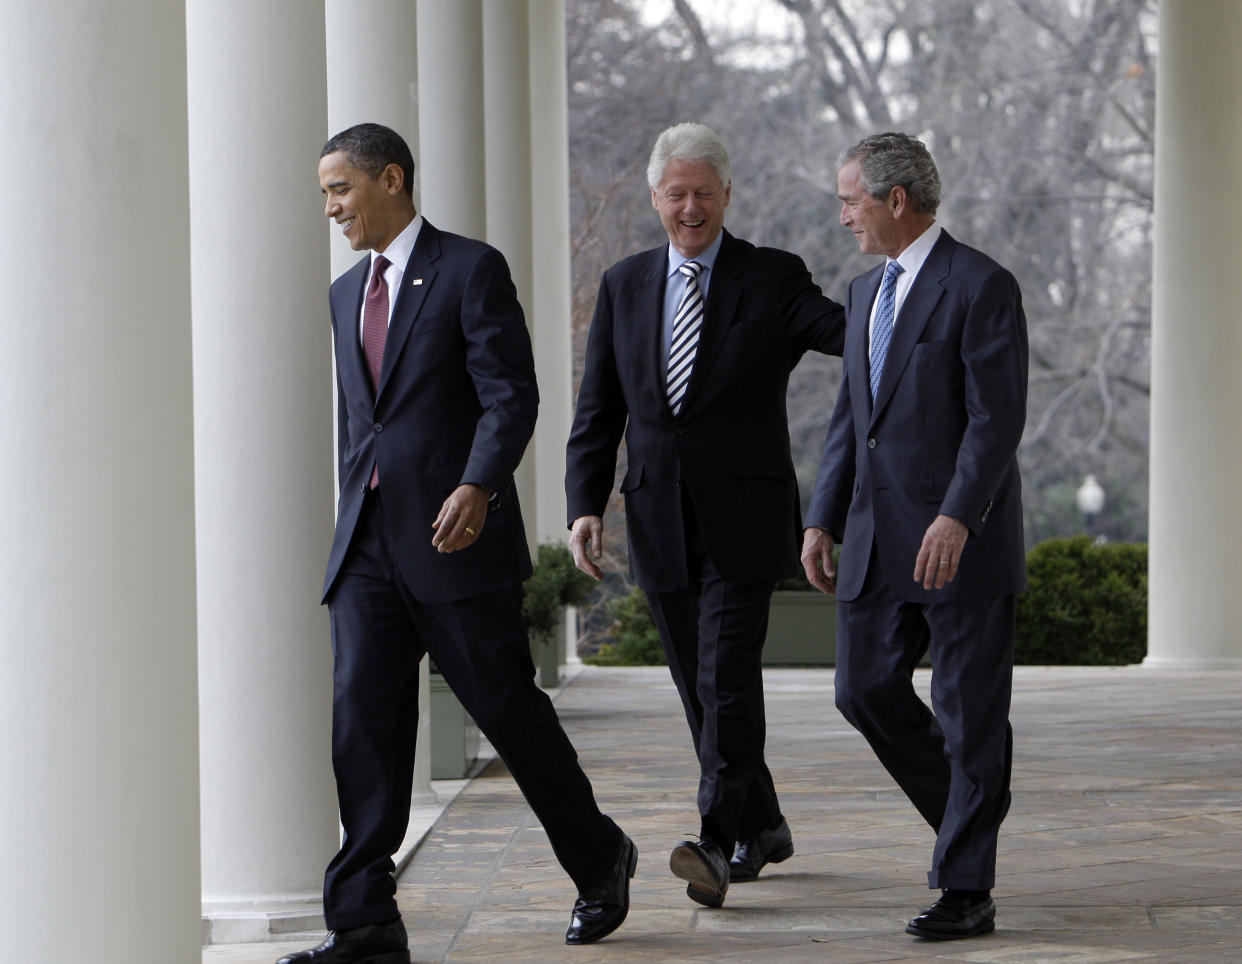 President Barack Obama walks with former Presidents Bill Clinton, cenrter, and George W. Bush, right, towards the Rose Garden at the White House in Washington Saturday, Jan. 16, 2010. Bush and Clinton have been asked by Obama to help with U.S. relief efforts after the earthquake in Haiti.  (AP Photo/Alex Brandon)